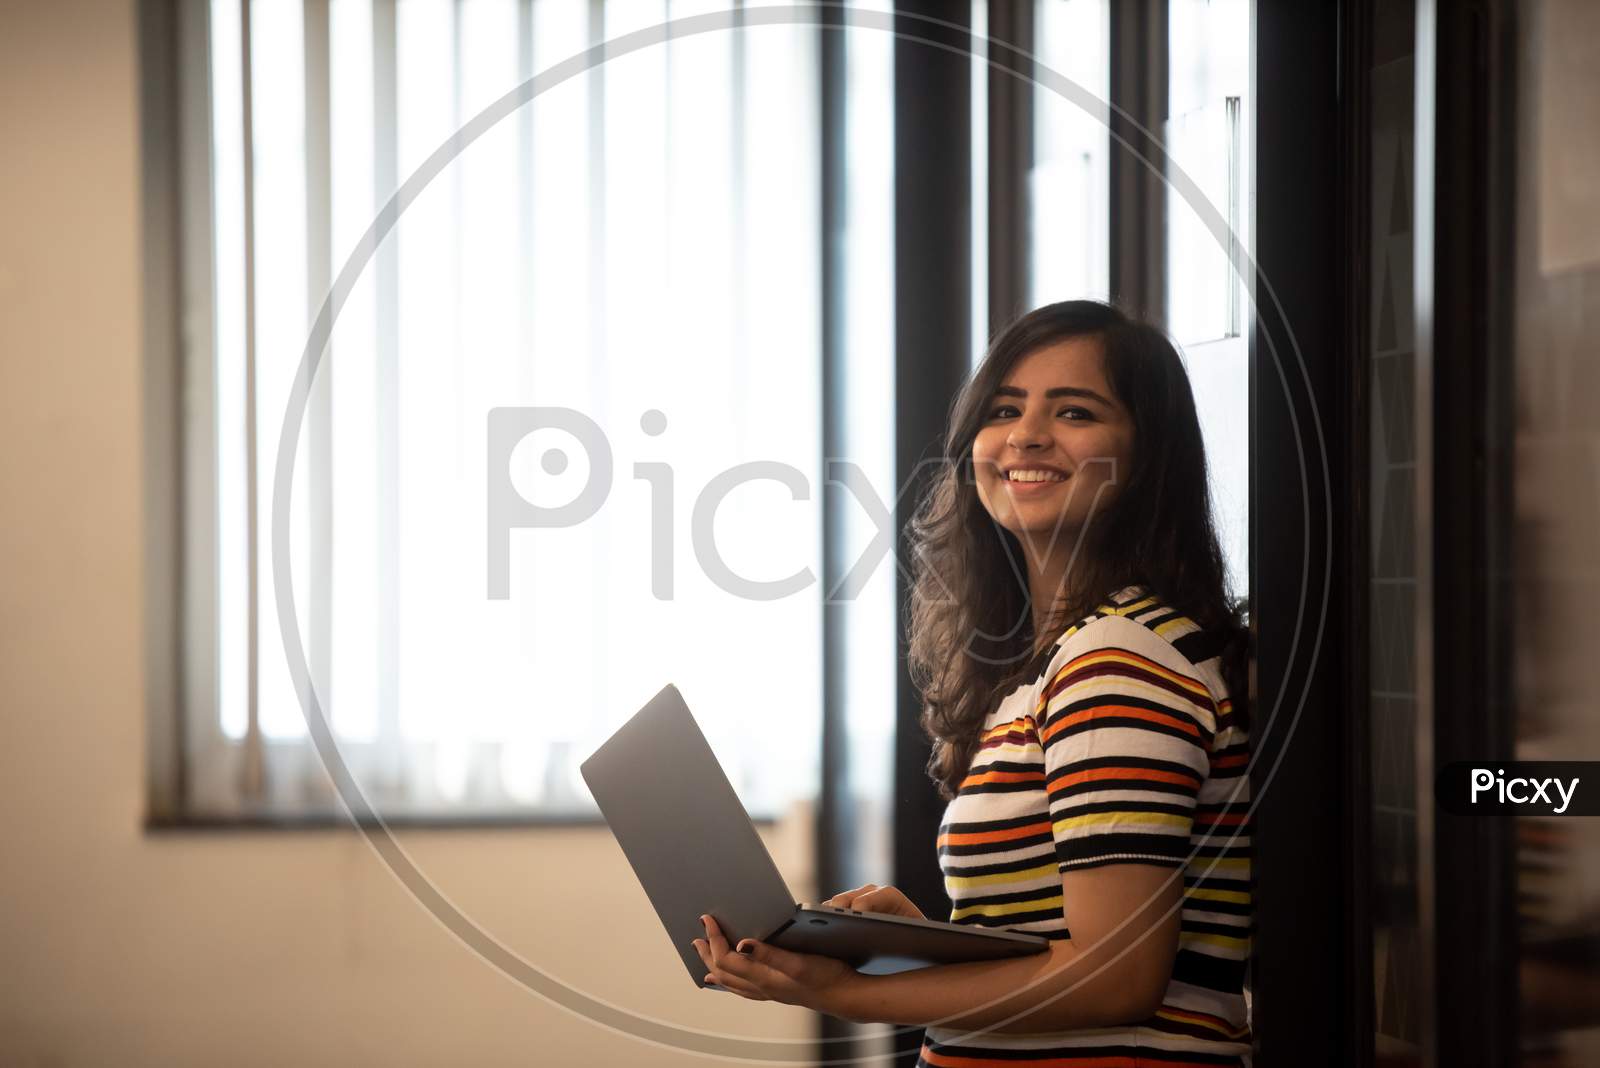 Smiling young Indian girl working in an Office.